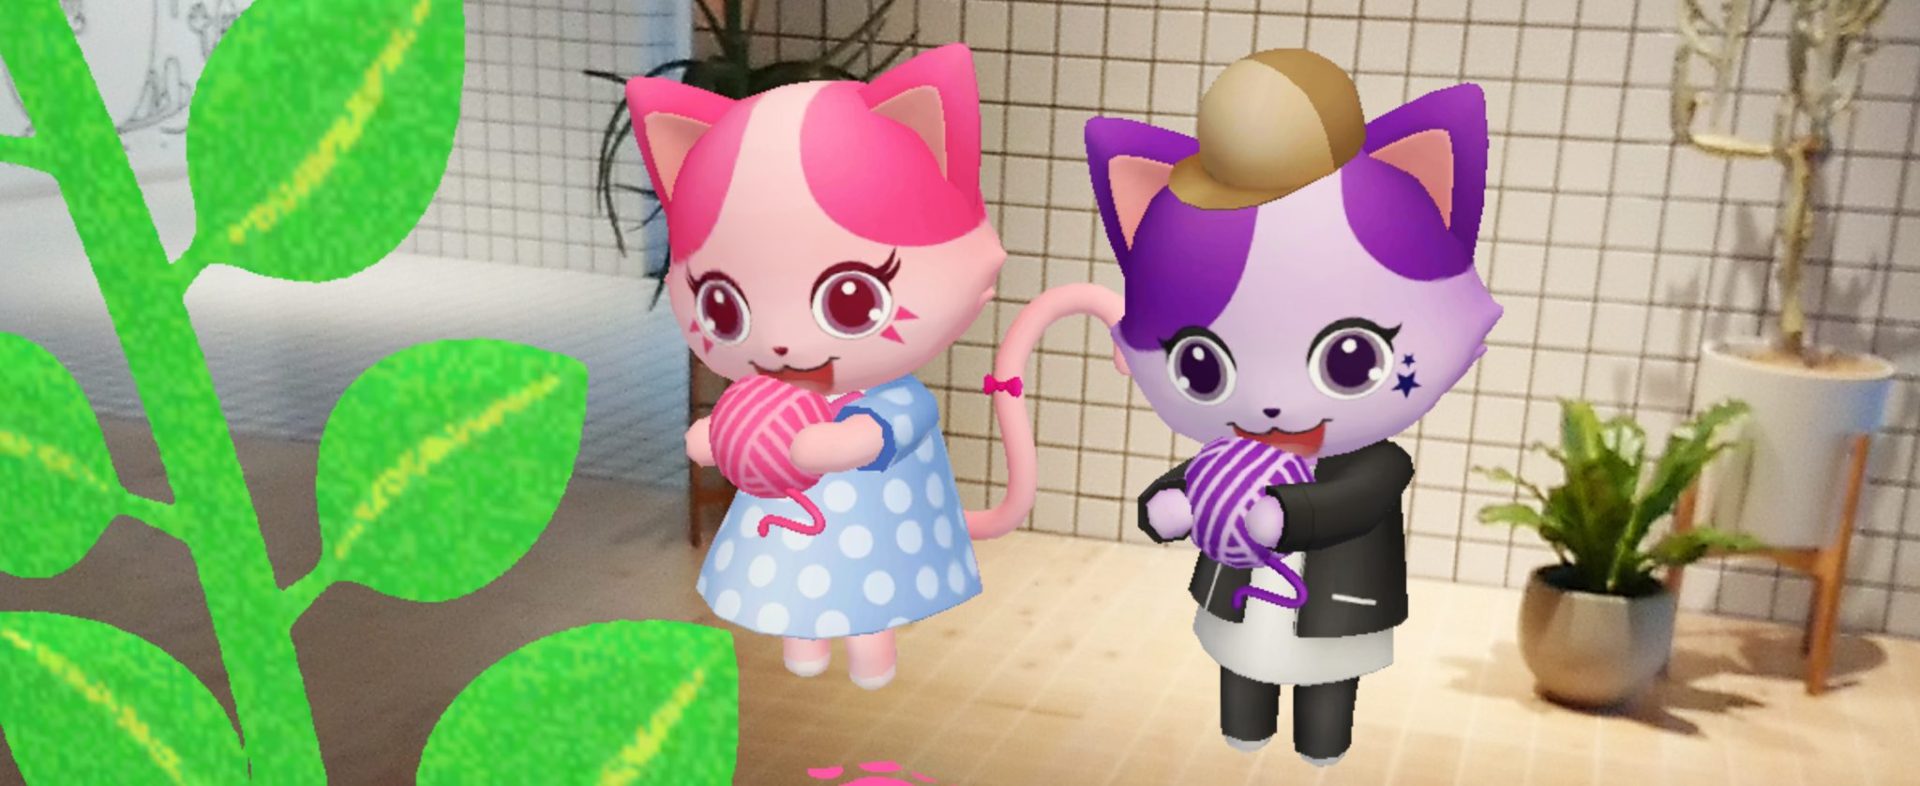 Image of an AR experience featuring two characters from “Jizu no Mori”